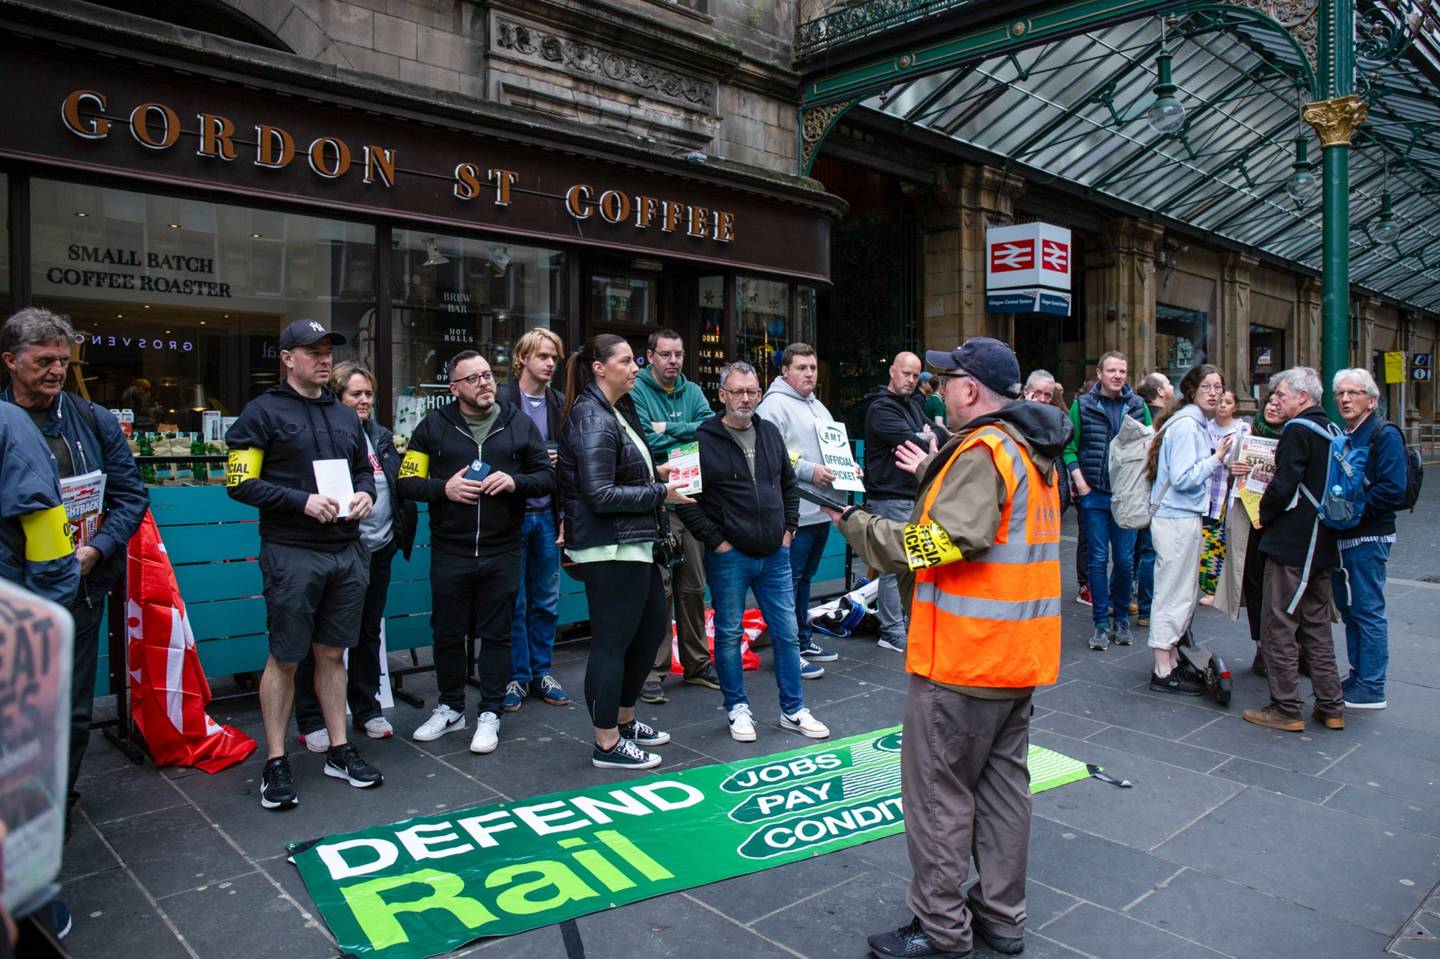 UK rail workers began Britain's biggest rail strike in three decades on Tuesday after unions rejected a last-minute offer from train companies, bringing services nationwide to a near standstill.dfd